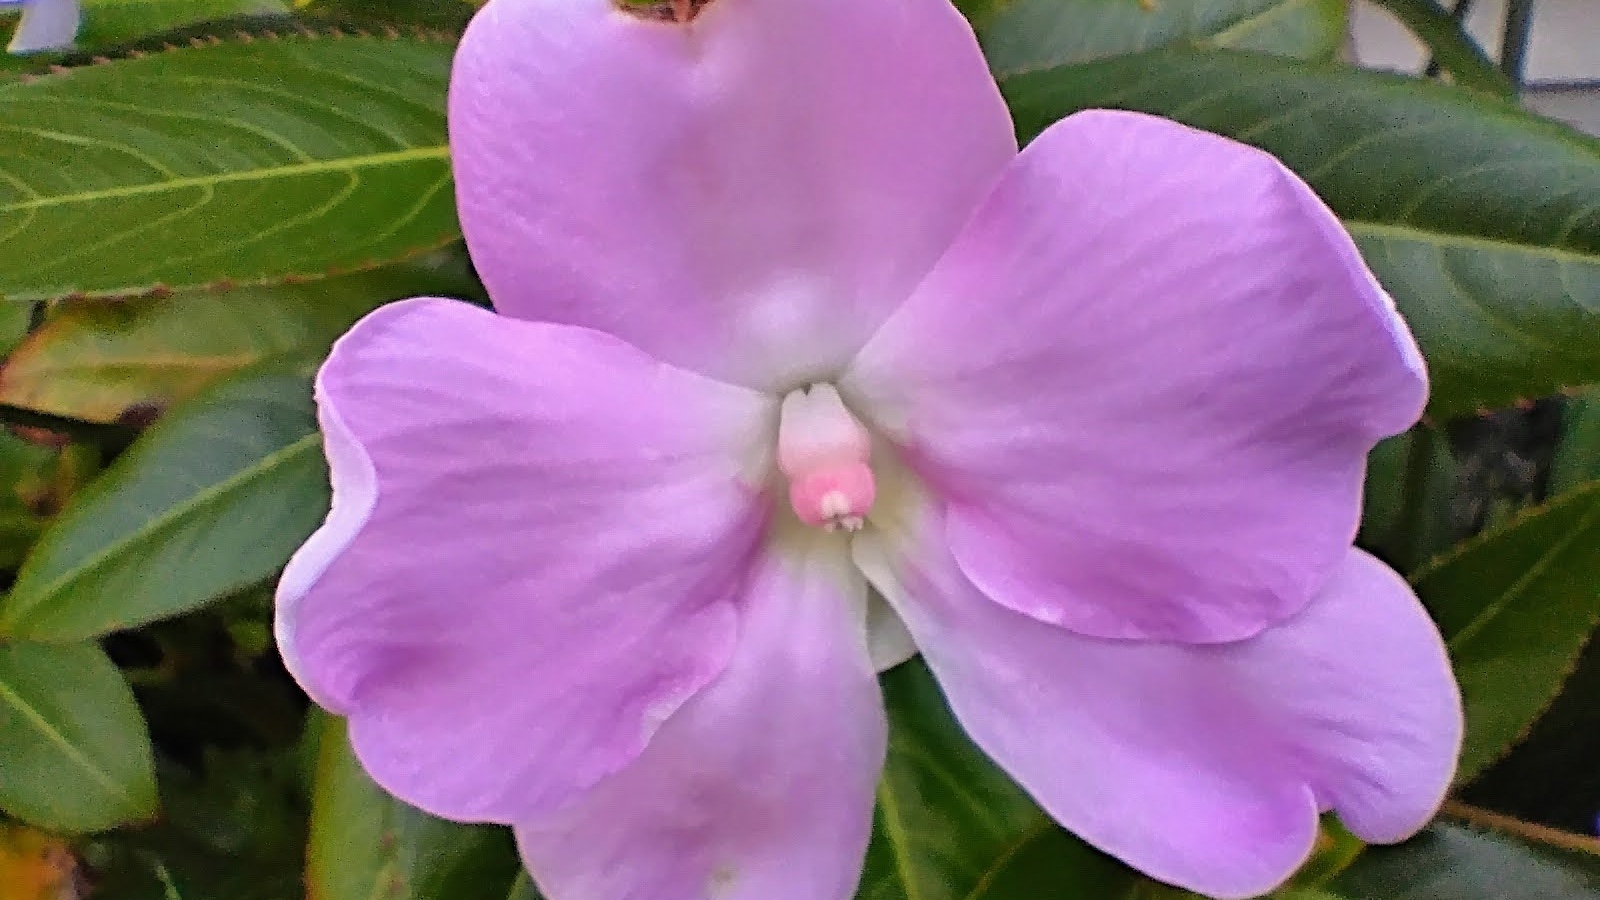 Moto G 5G 2024 macro camera sample featuring a close-up of an impatiens